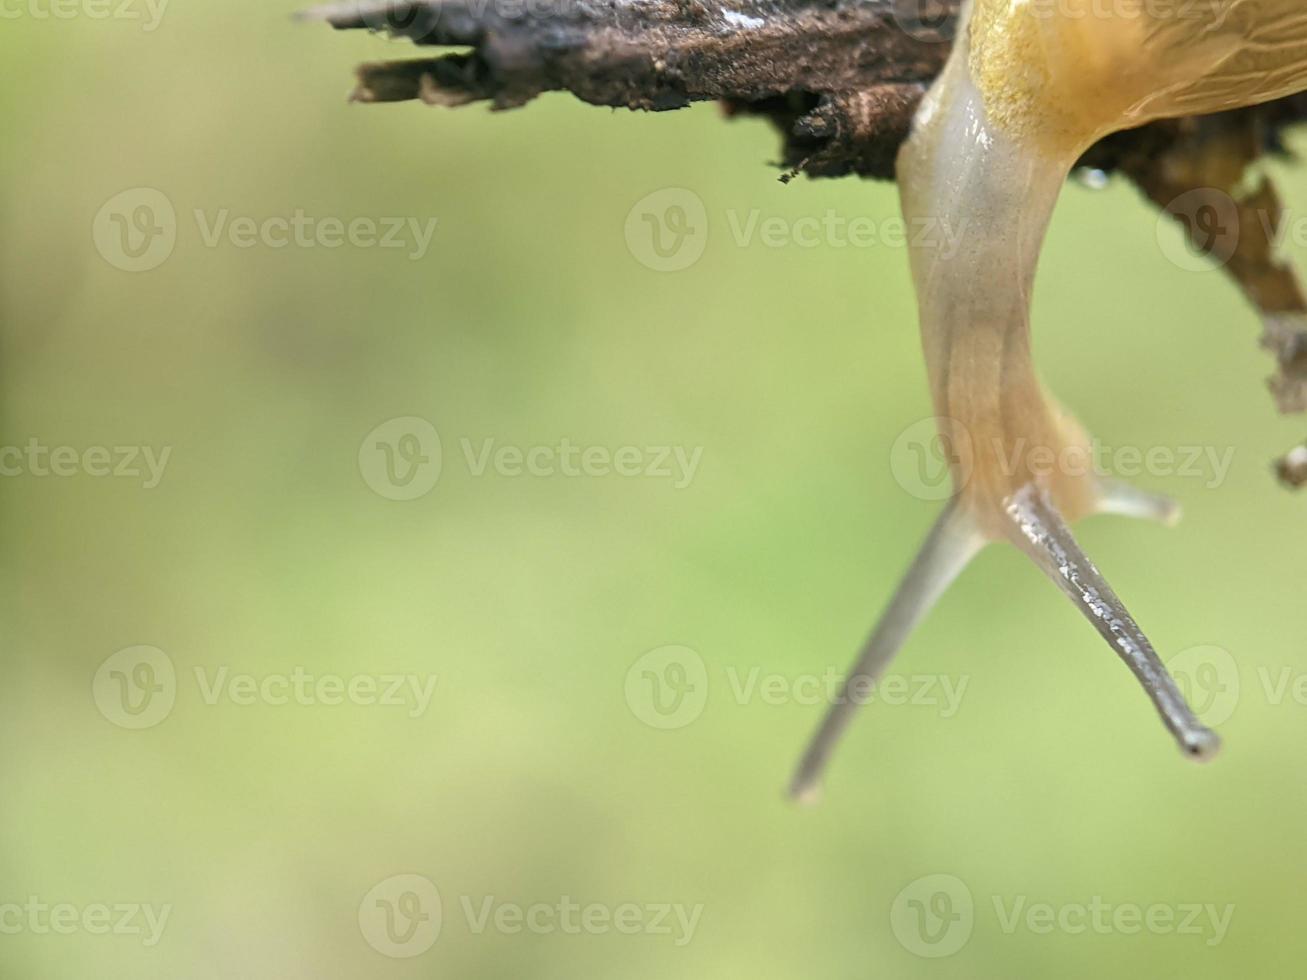 Snail on the twig, in the morning, macro photography, extreme close up photo